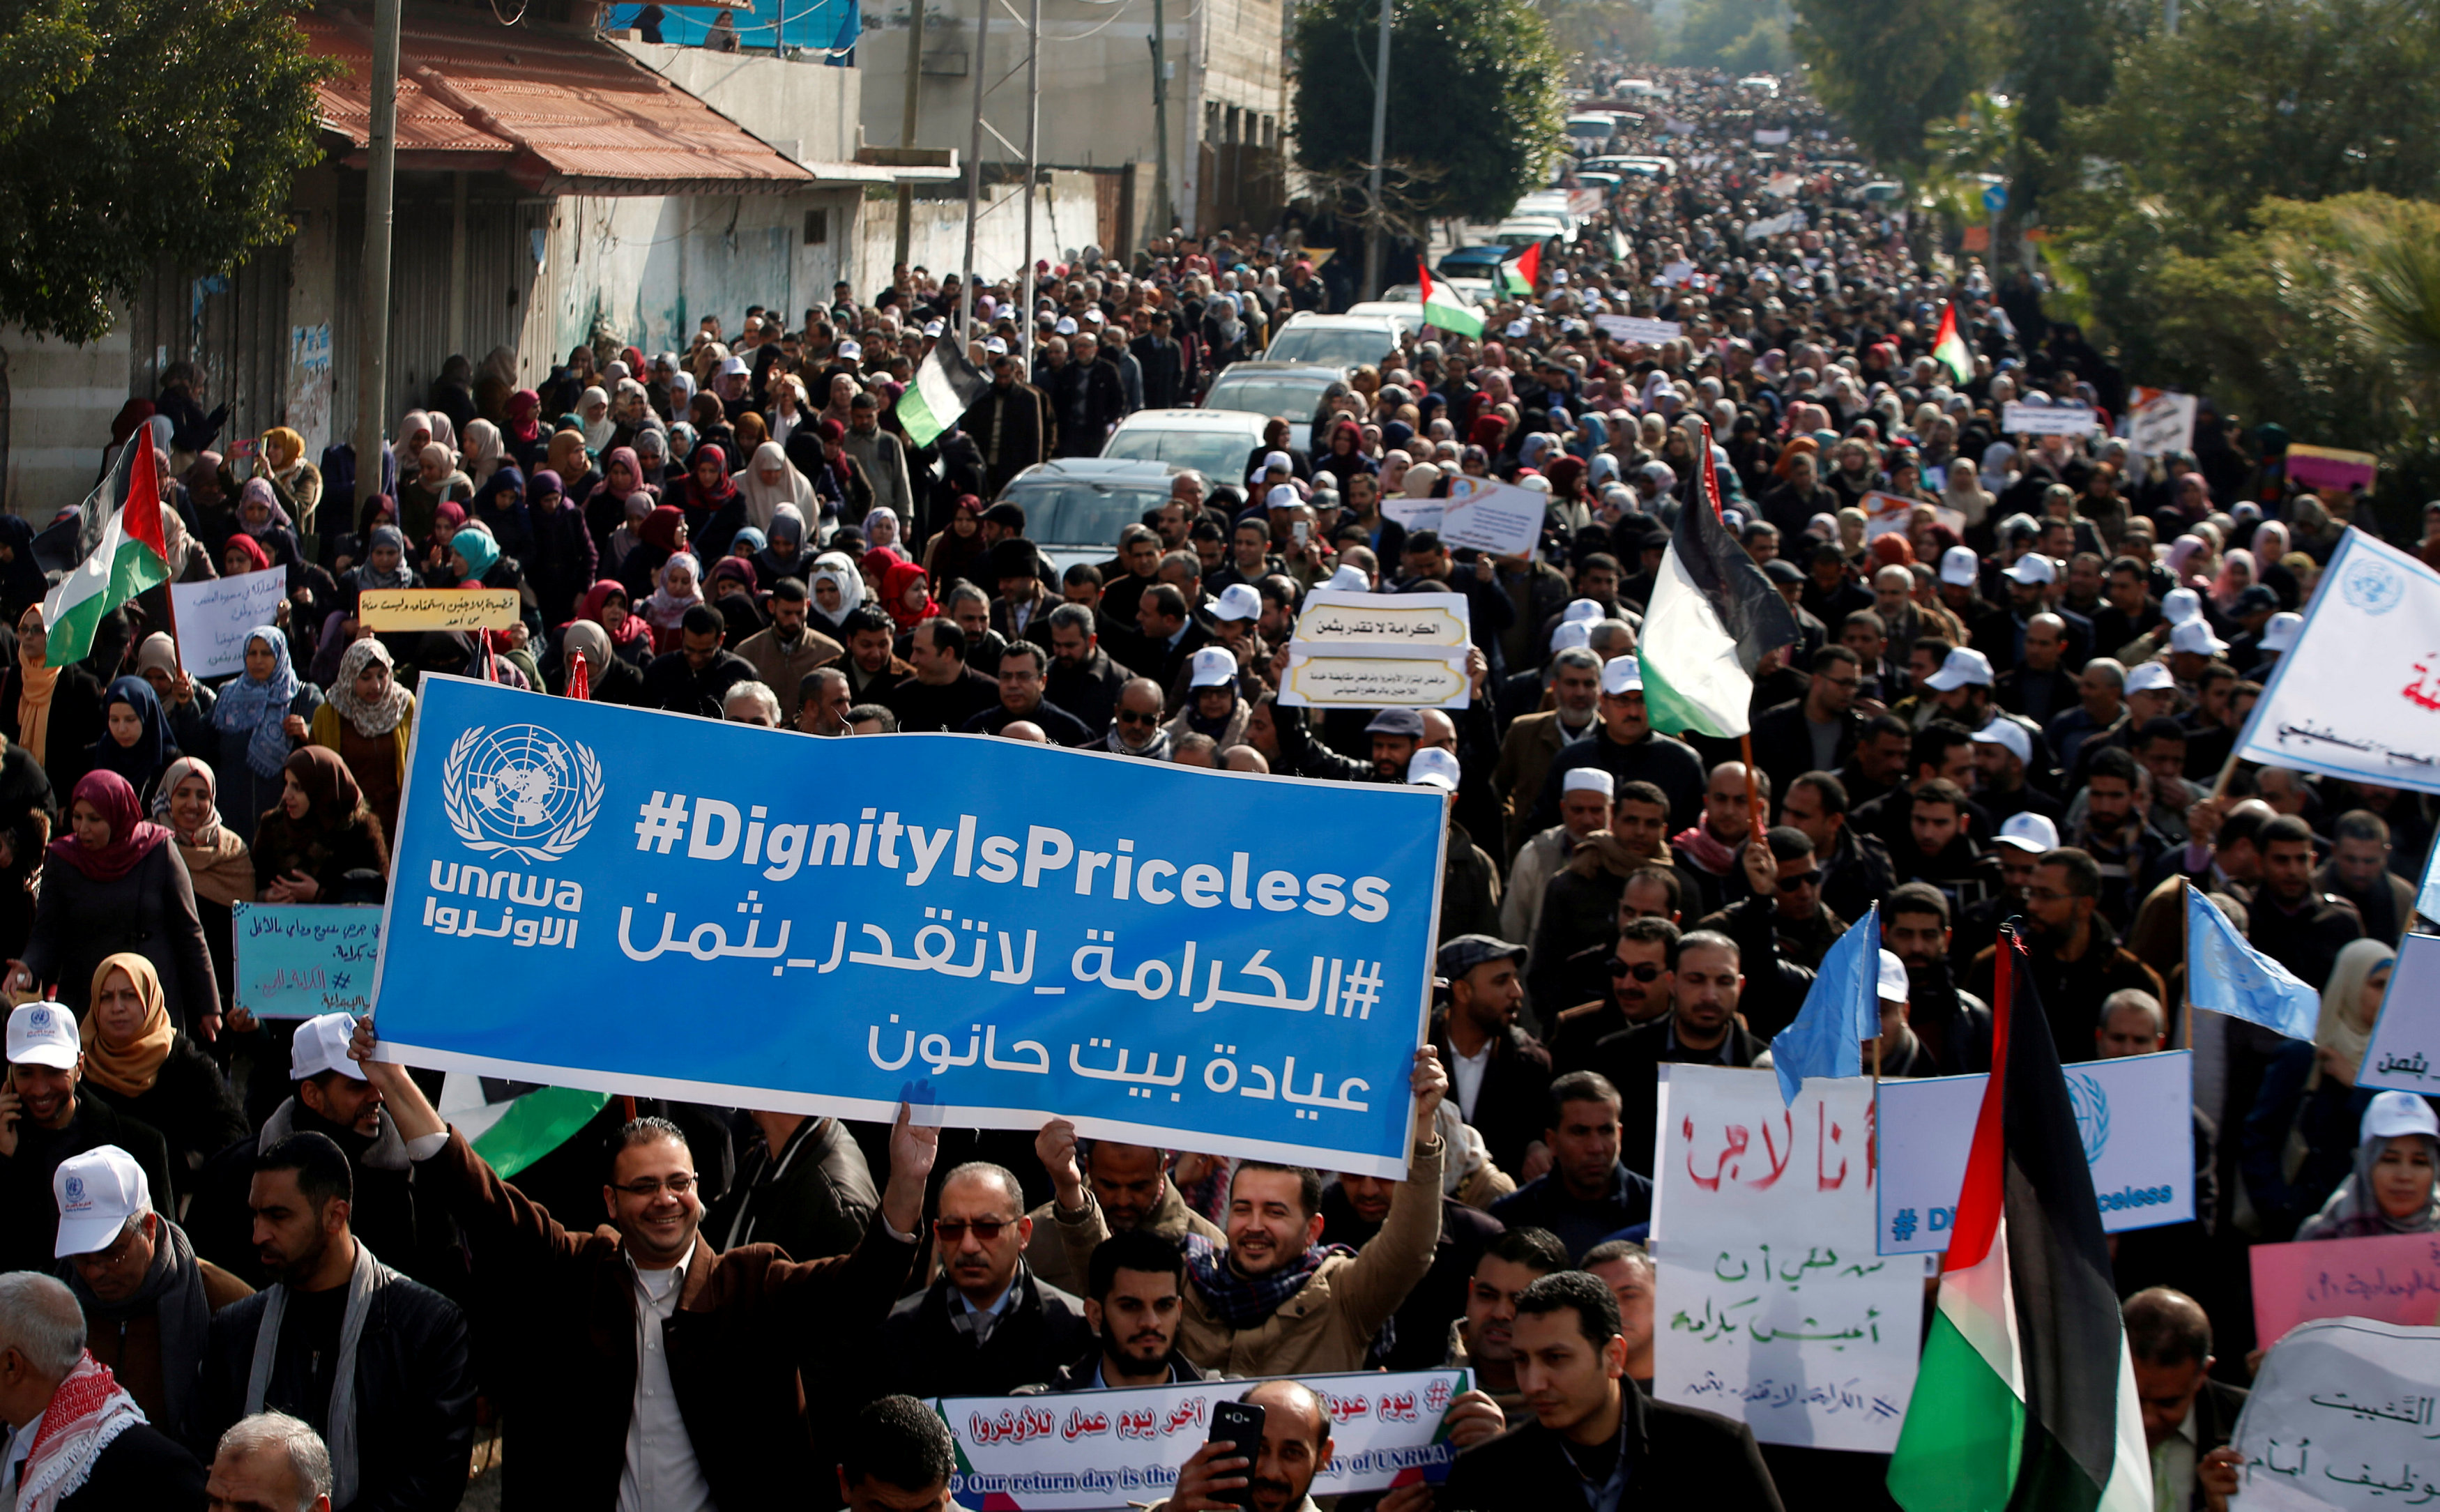 Palestinian employees of United Nations Relief and Works Agency (UNRWA) hold a sign during a protest against a U.S. decision to cut aid, in Gaza City January 29, 2018.